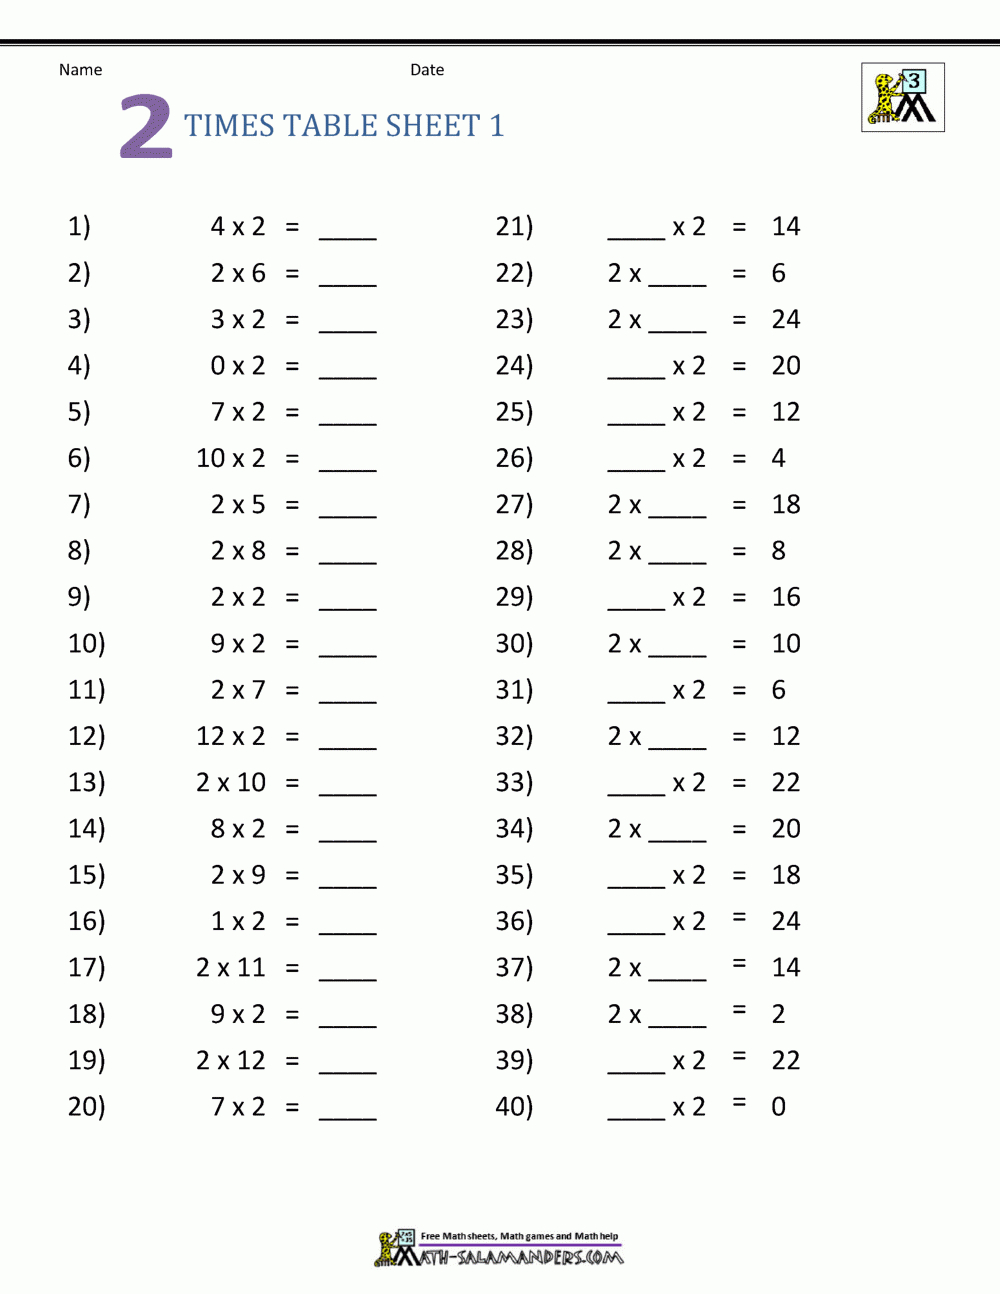 Multiplication Table Worksheets Grade 3 within Multiplication Worksheets 4 And 6